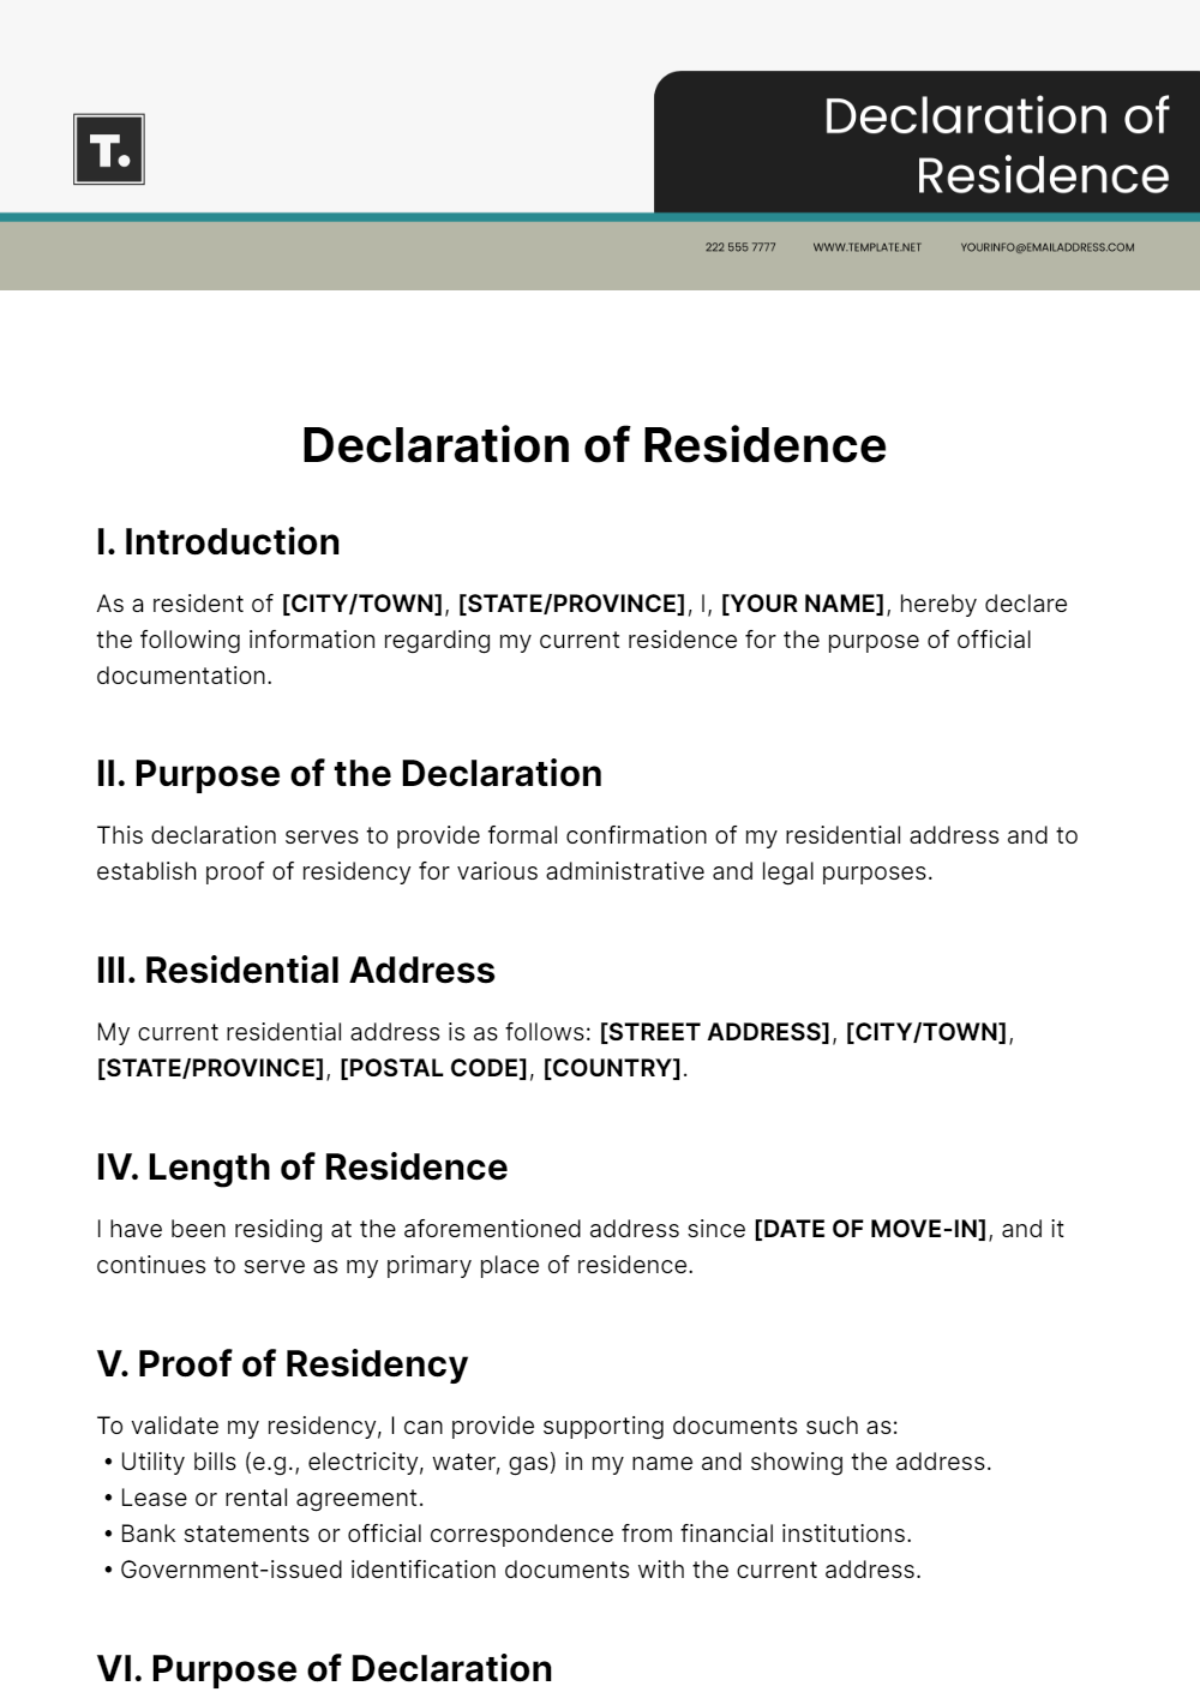 Declaration of Residence Template